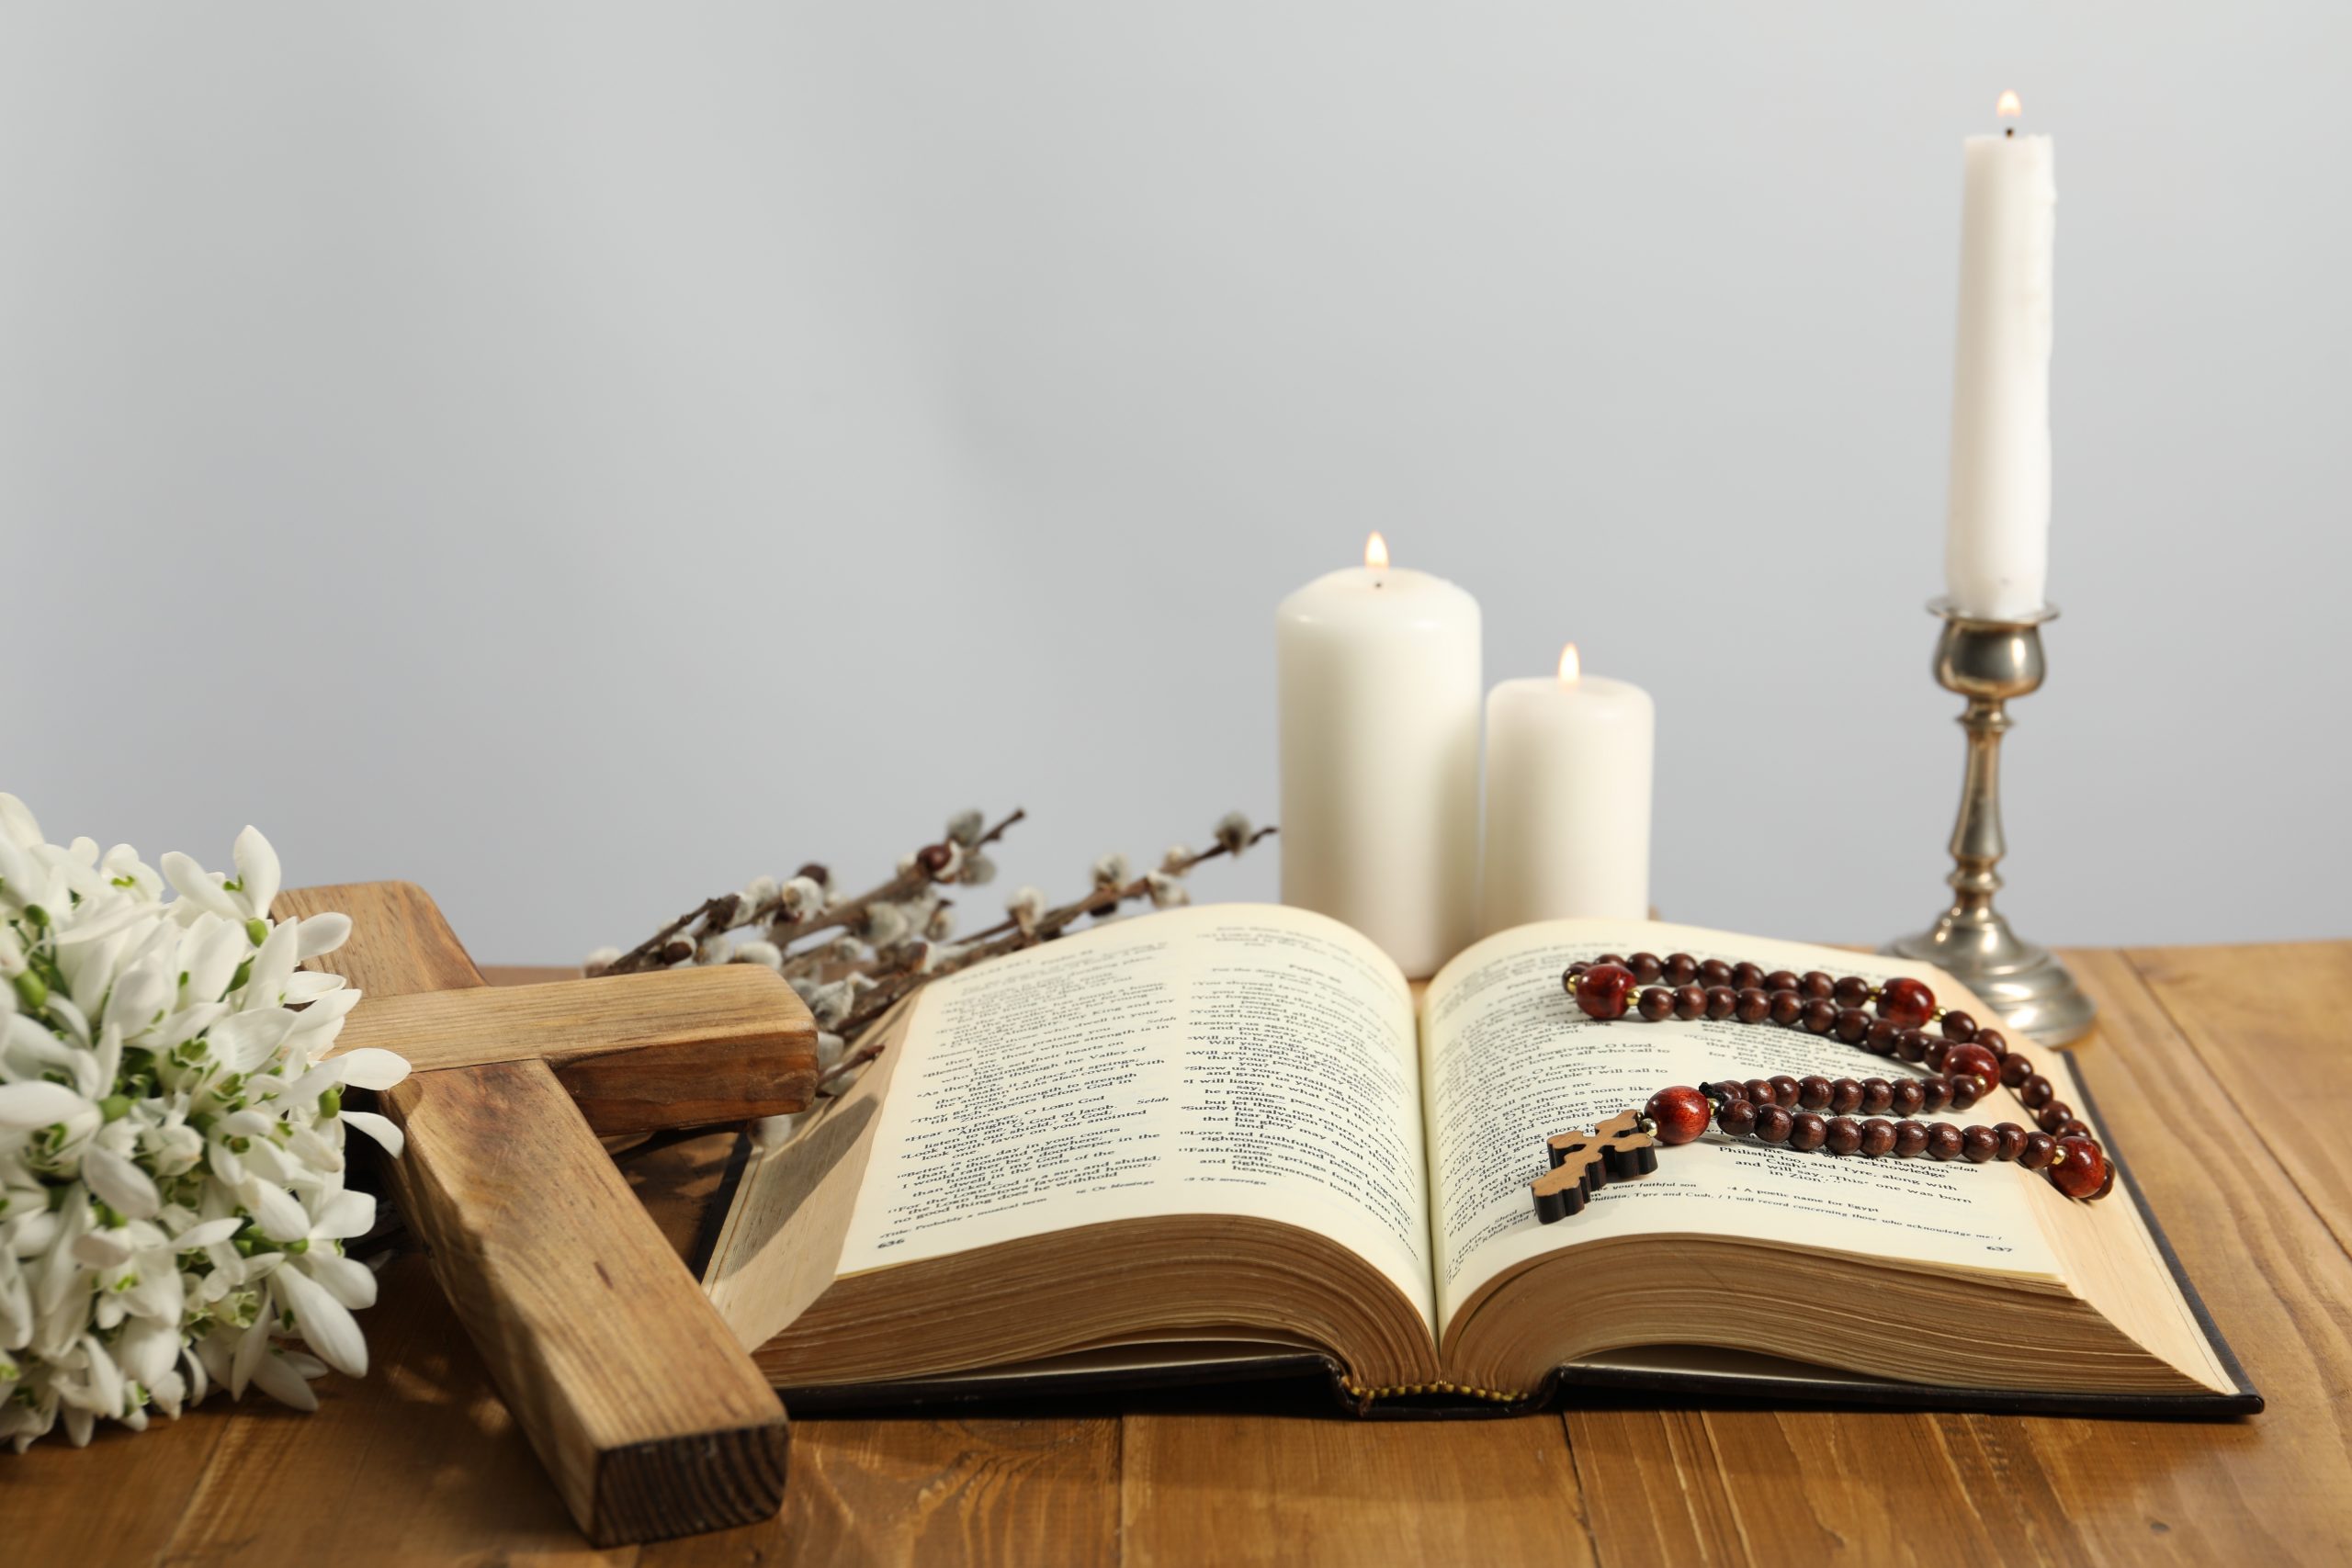 Church candles, cross, rosary beads, Bible, snowdrops and willow branches on wooden table against light background